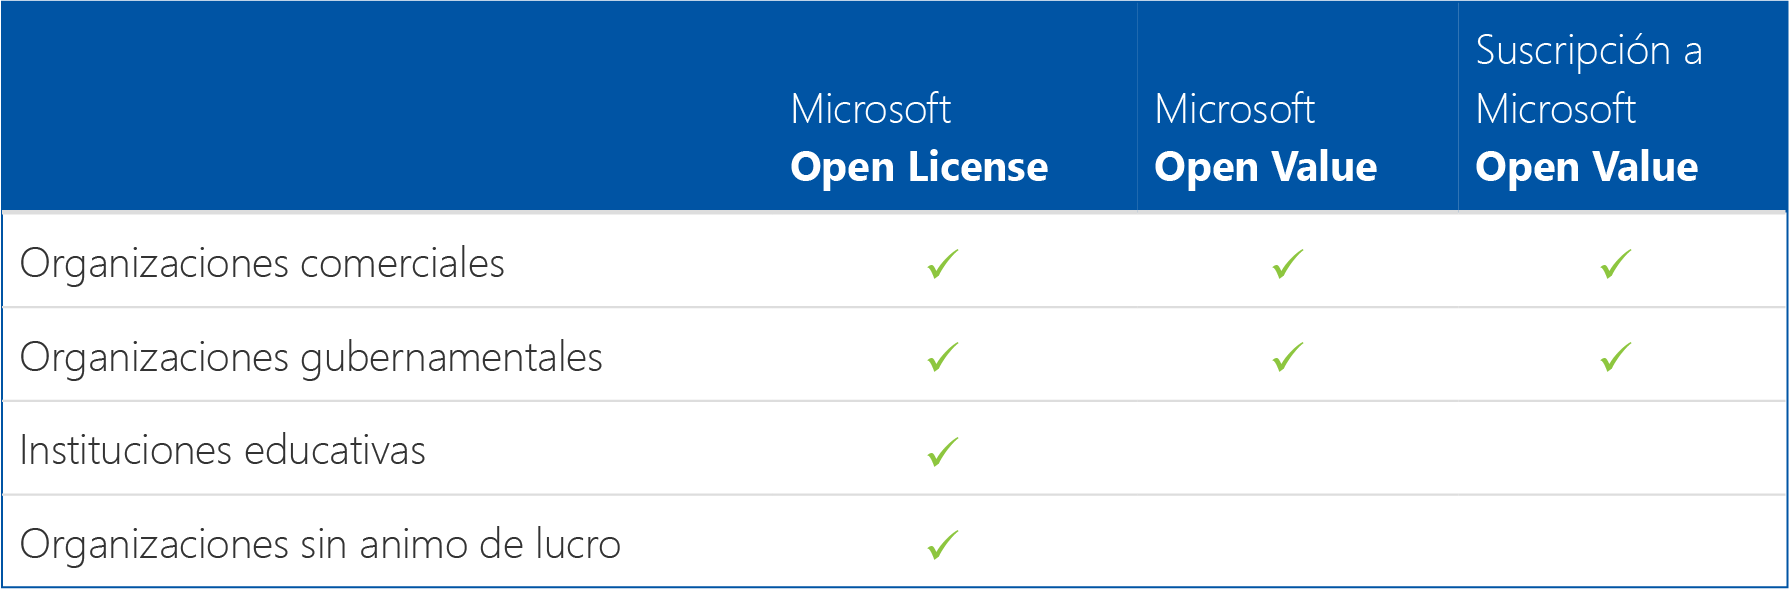 Microsoft Office 365 Open Licence